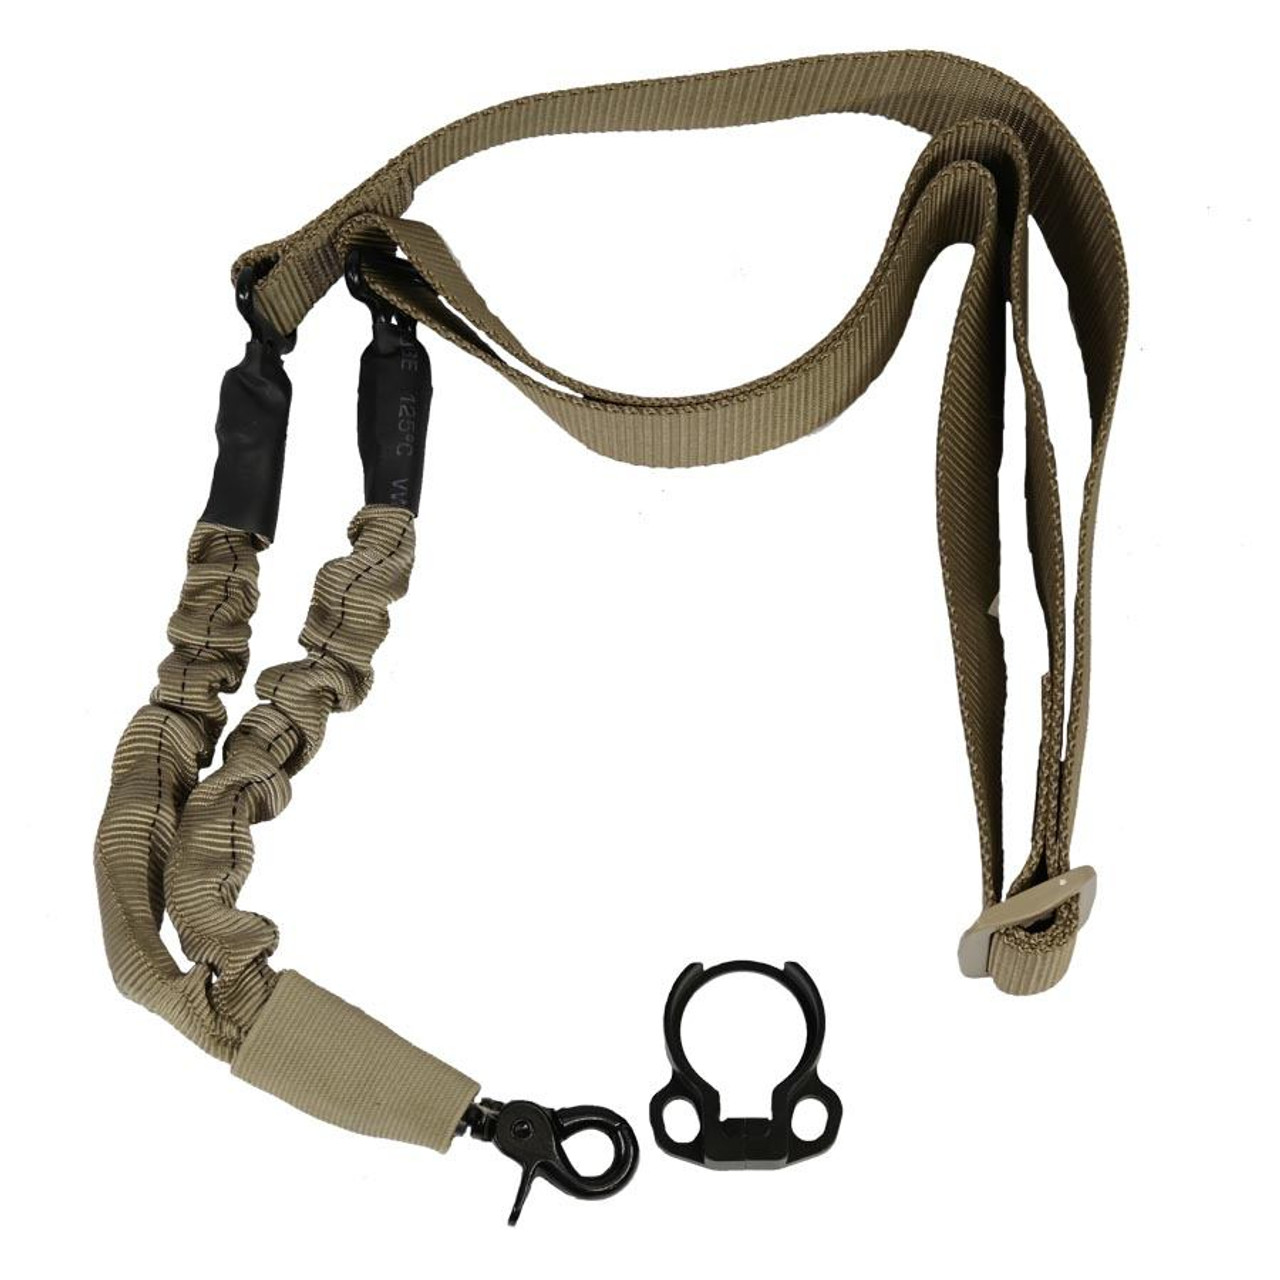 Guntec USA 1POINT-T-DELUXE-EGG One Point Bungee Sling With QD Snap Hook &amp; QD Ambi Bolt On Sling Adapter Combo Kit (Tan)